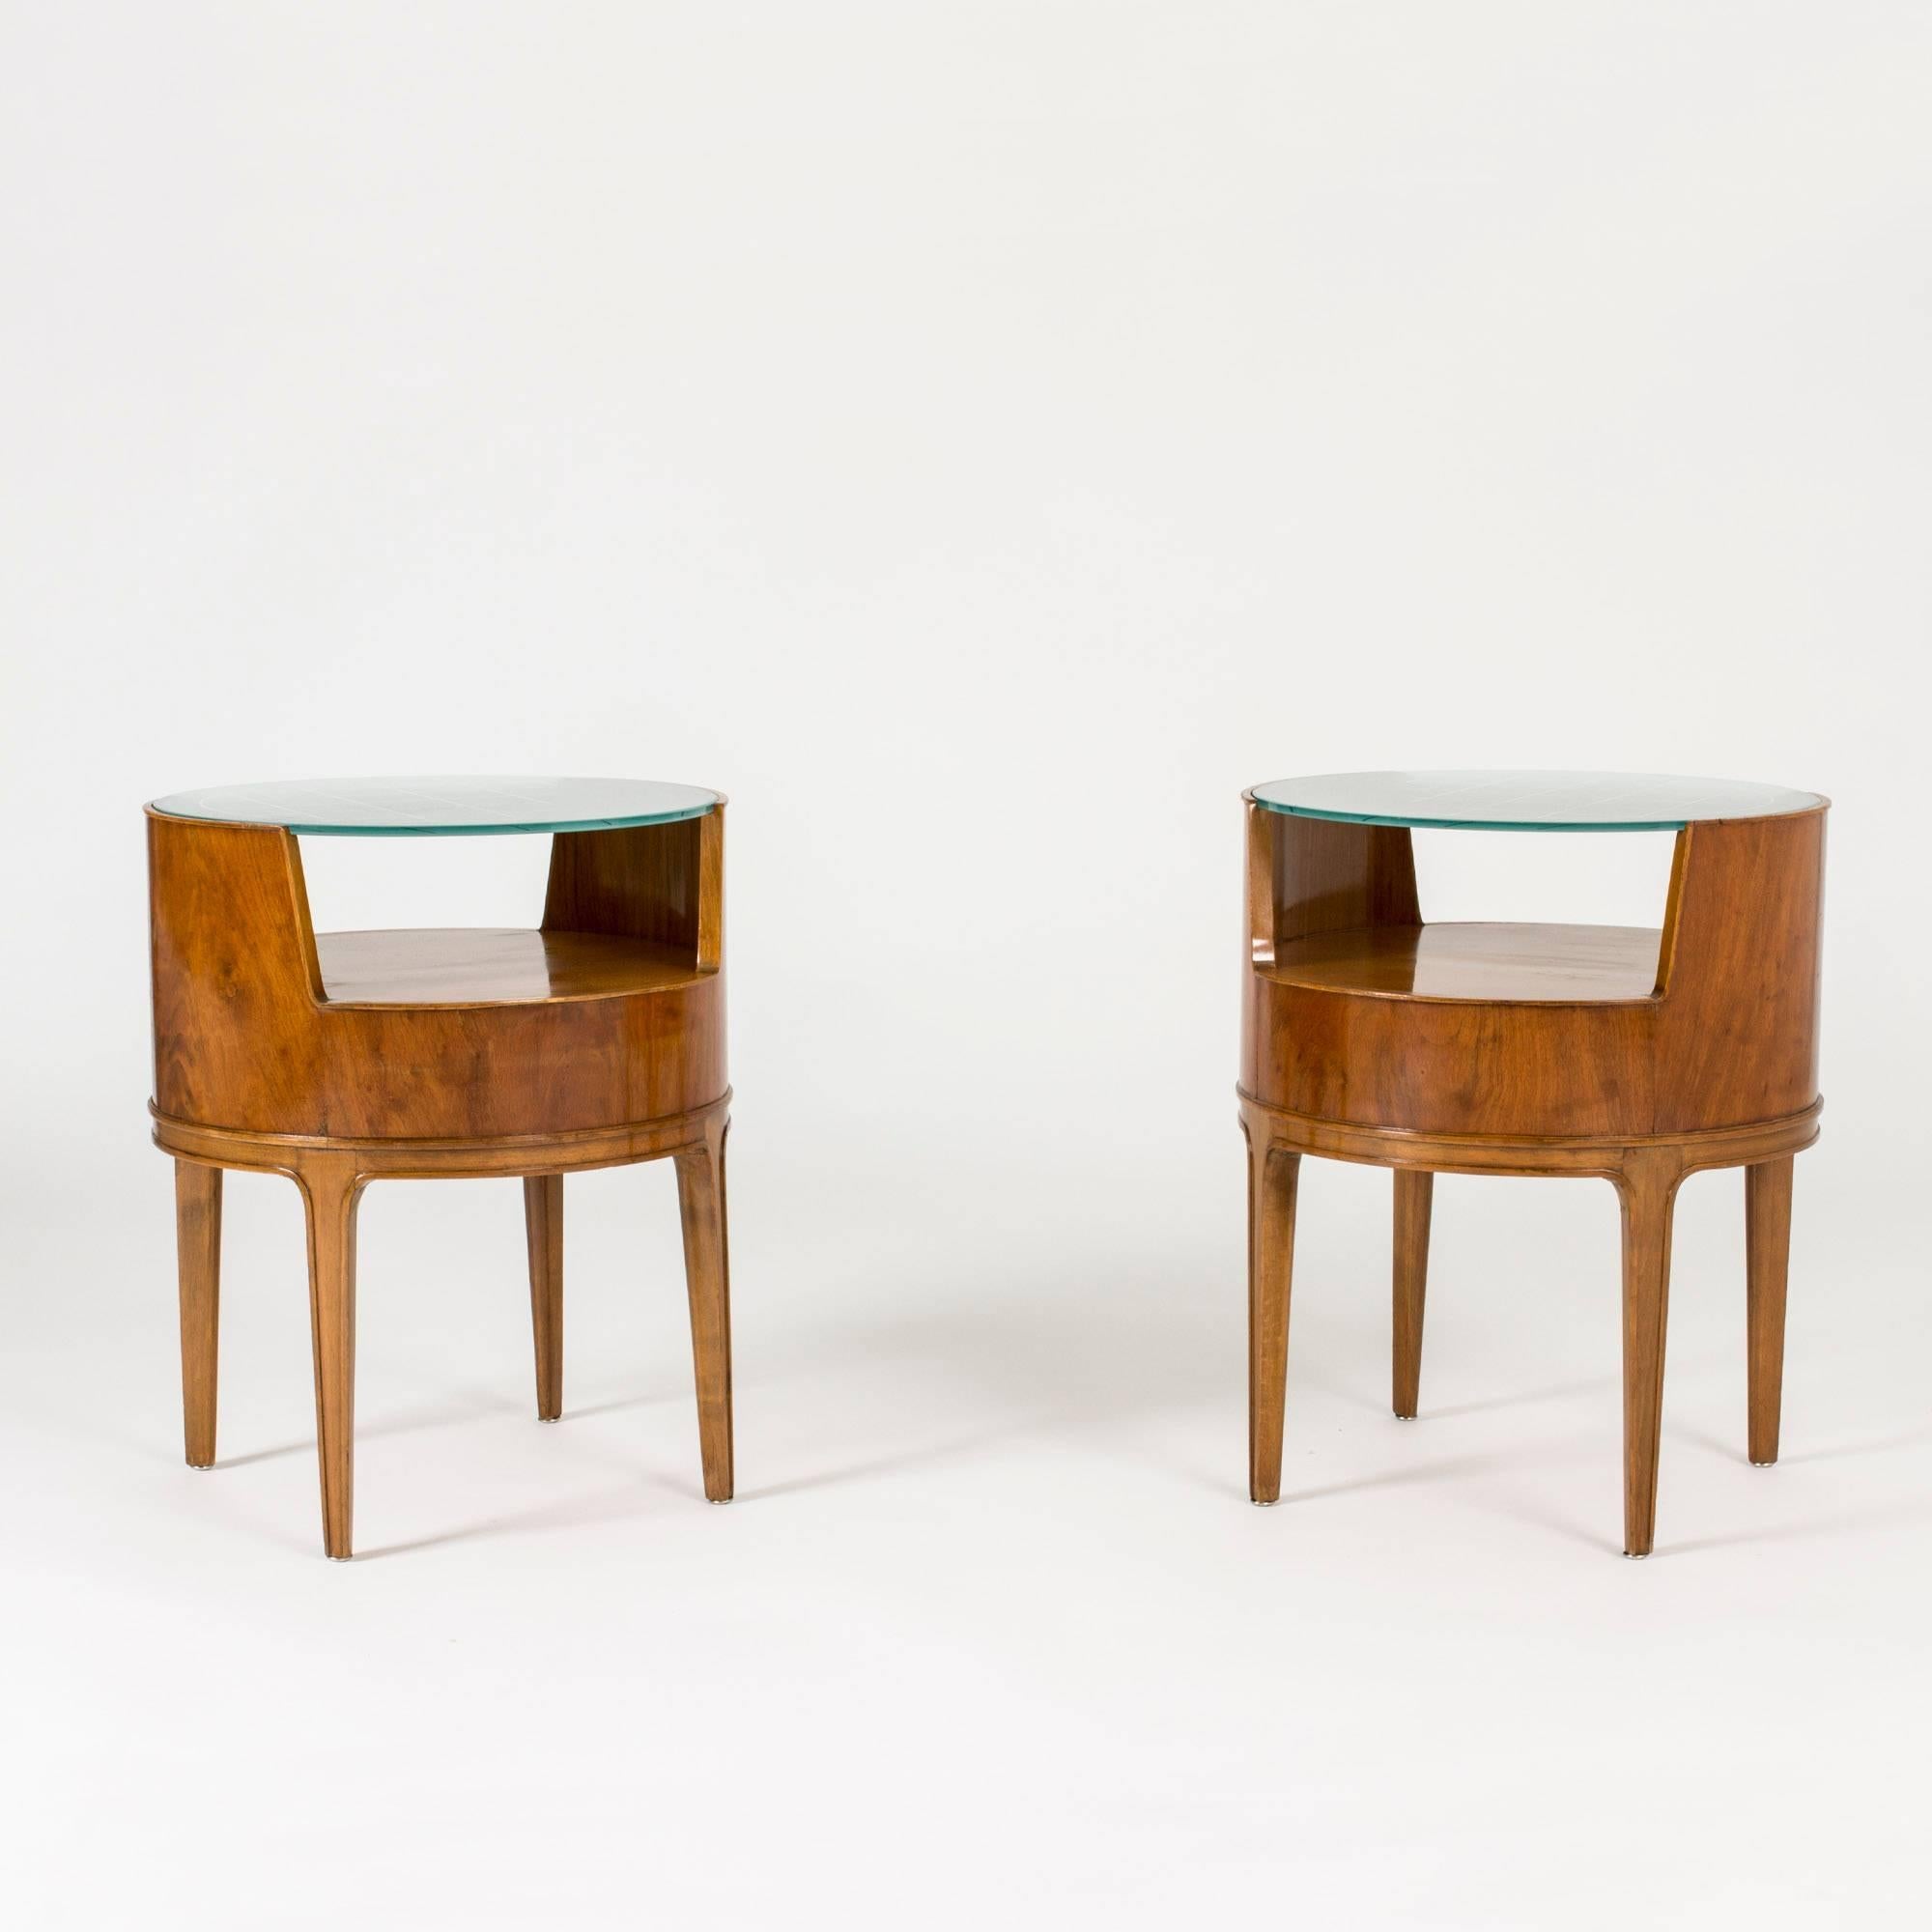 Swedish Pair of Mahogany and Glass Bedside Tables by Axel Larsson